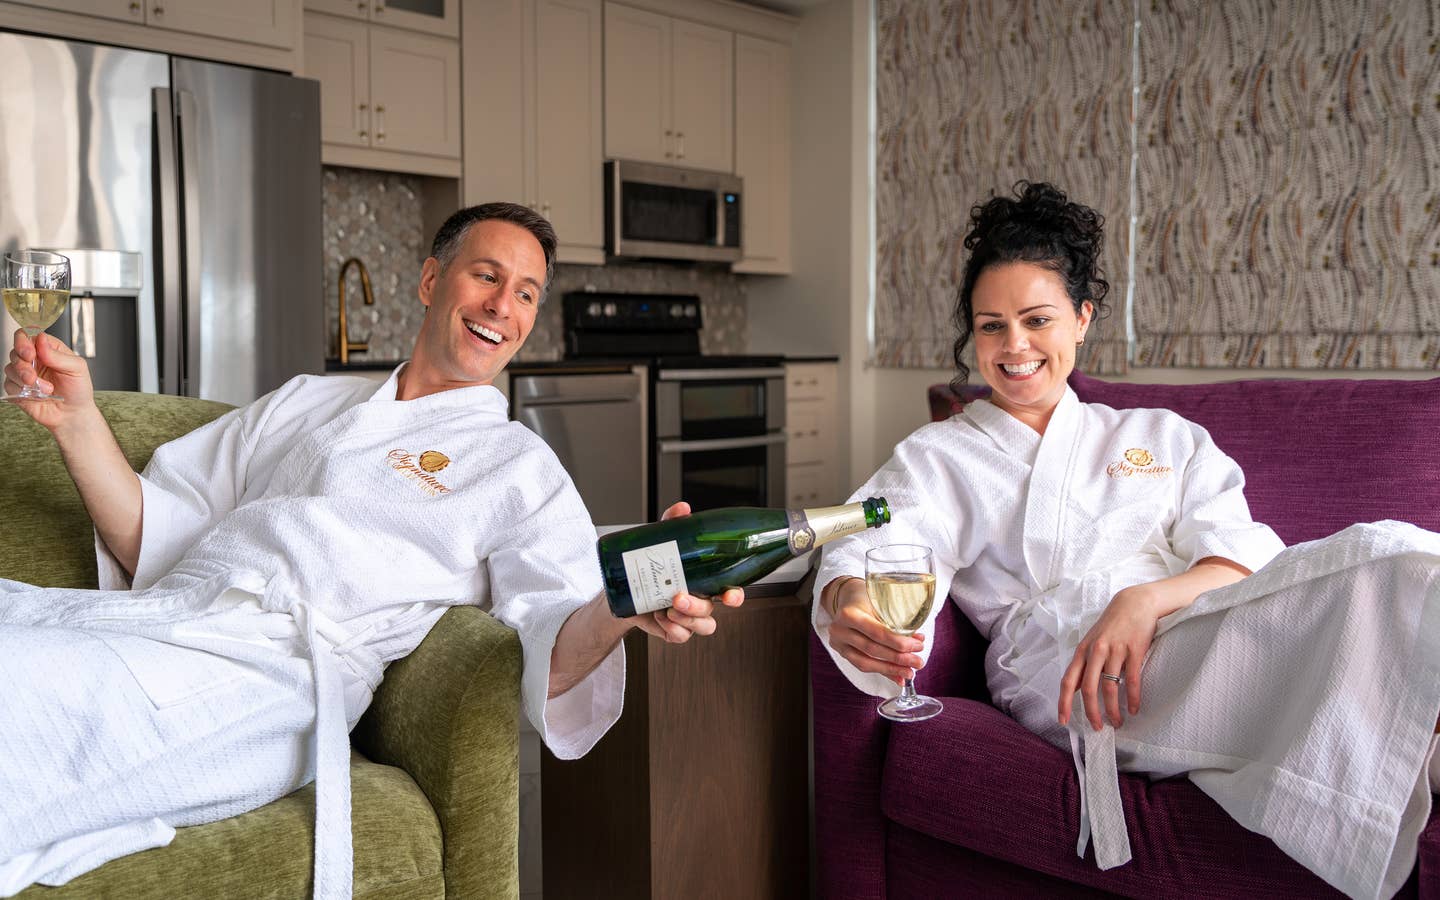 A man wearing a white robe on a green couch (left) holds a glass of champagne in his right hand while pouring the green bottle in this left hand for a woman (right) also wearing a white robe on a purple couch.